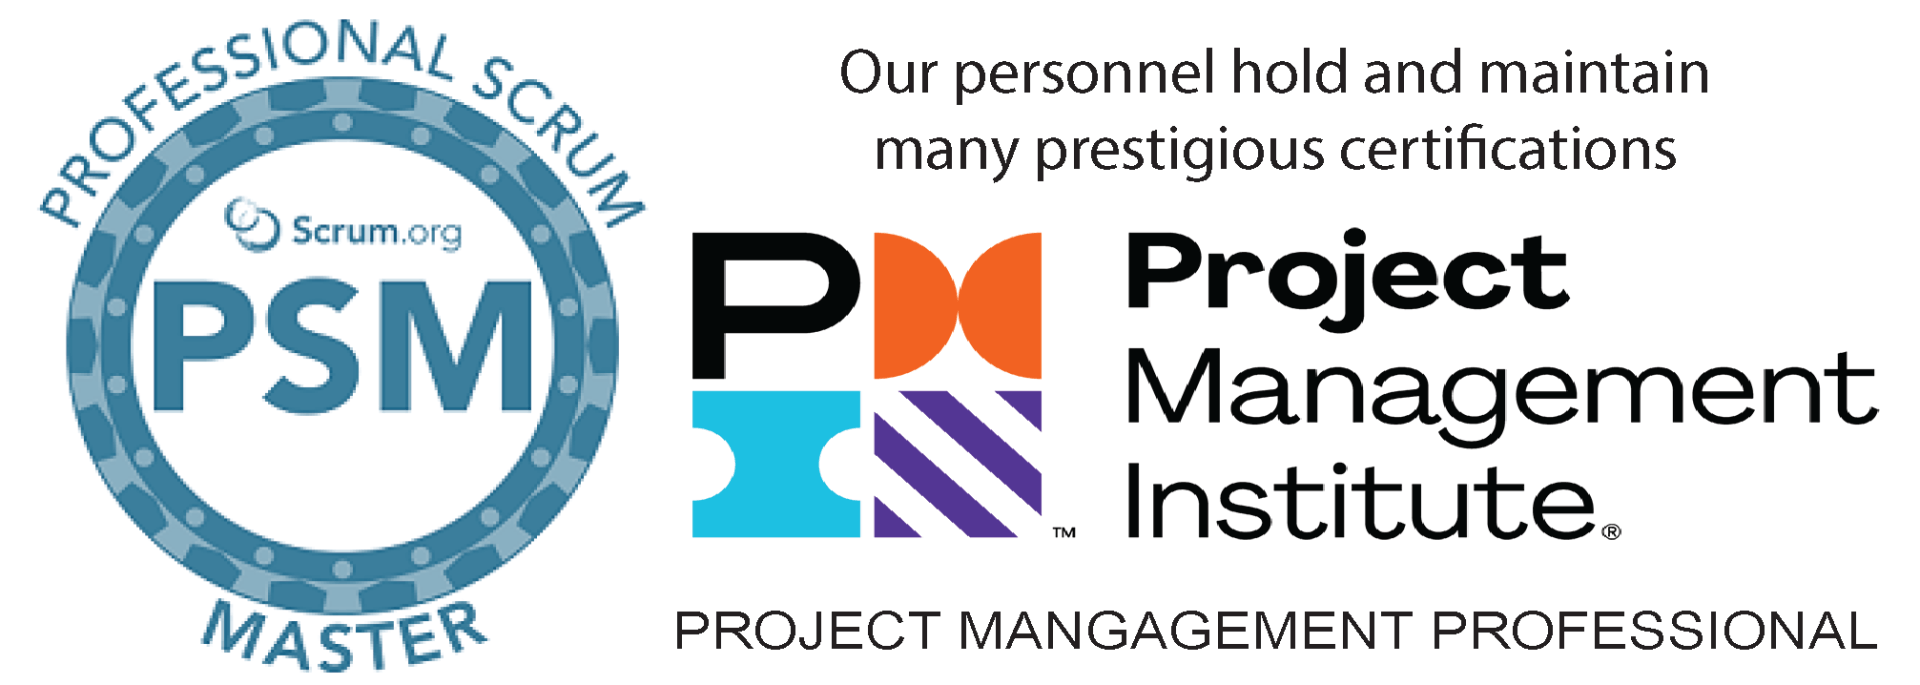 Logo Image: PMI Project Management Institute PMP Certified in blue, white and black text with an image of a half semi circle globe with crosshatched lines on black